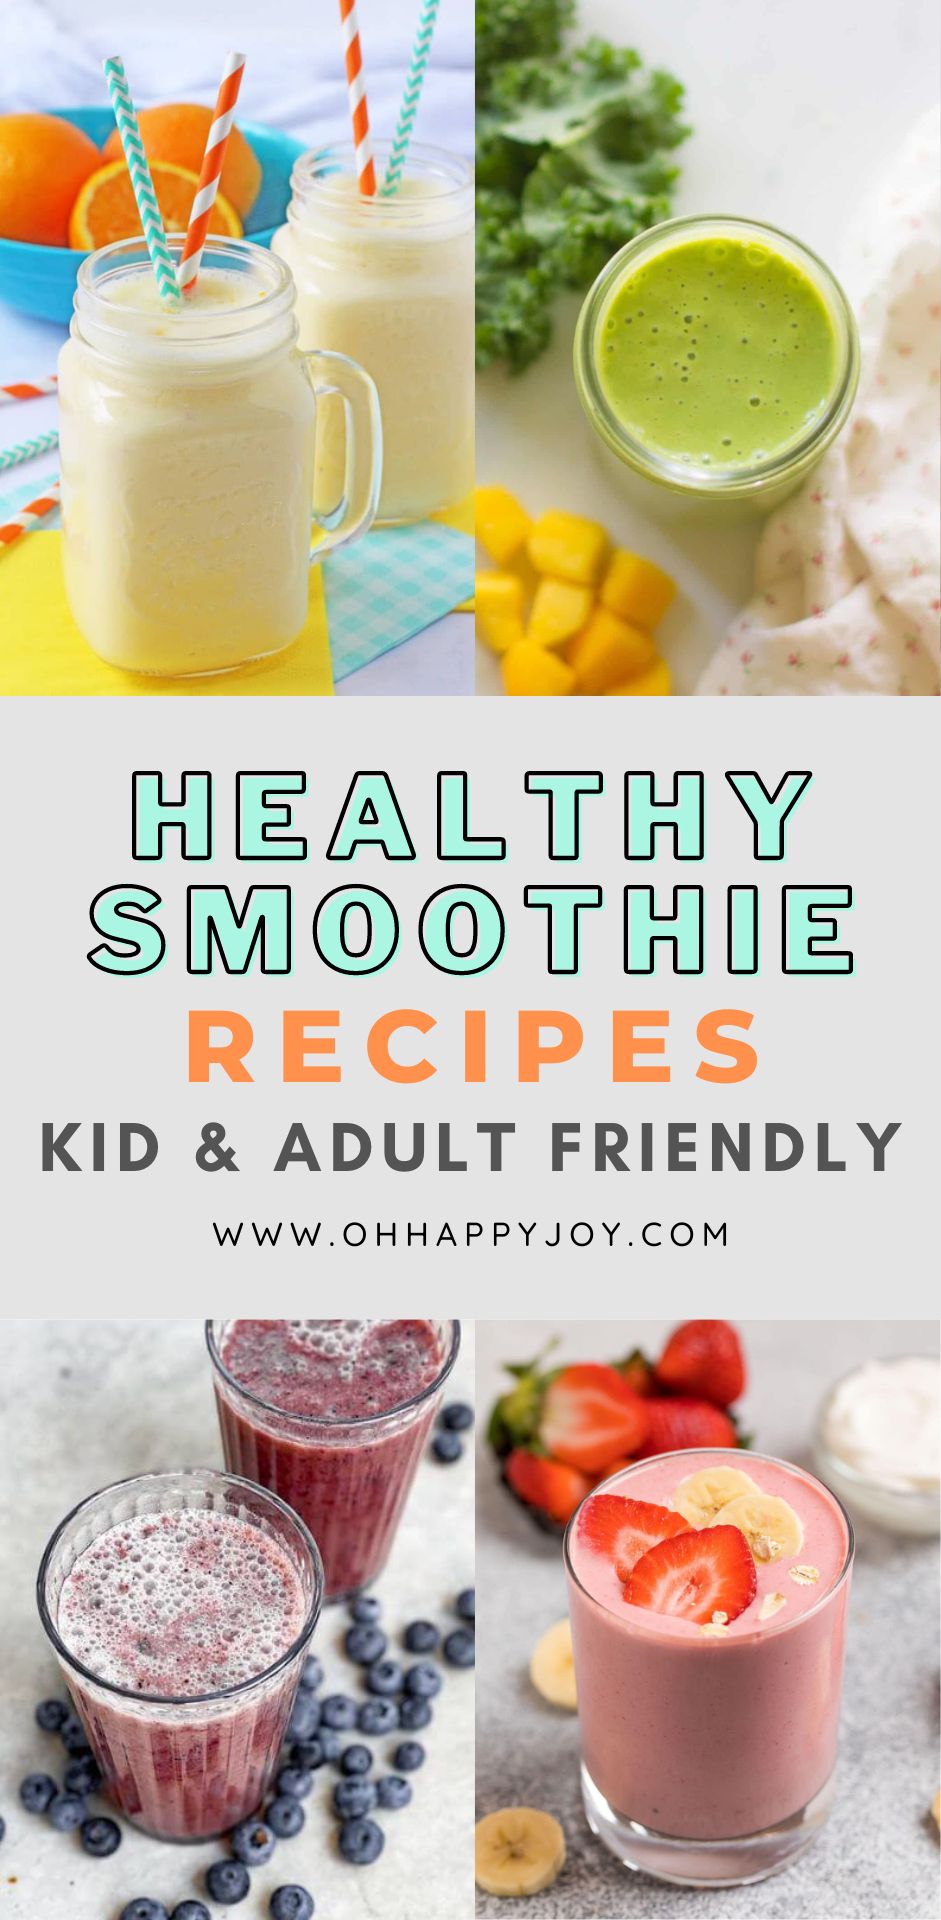 Healthy Smoothie Recipes - Kid and Adult Friendly